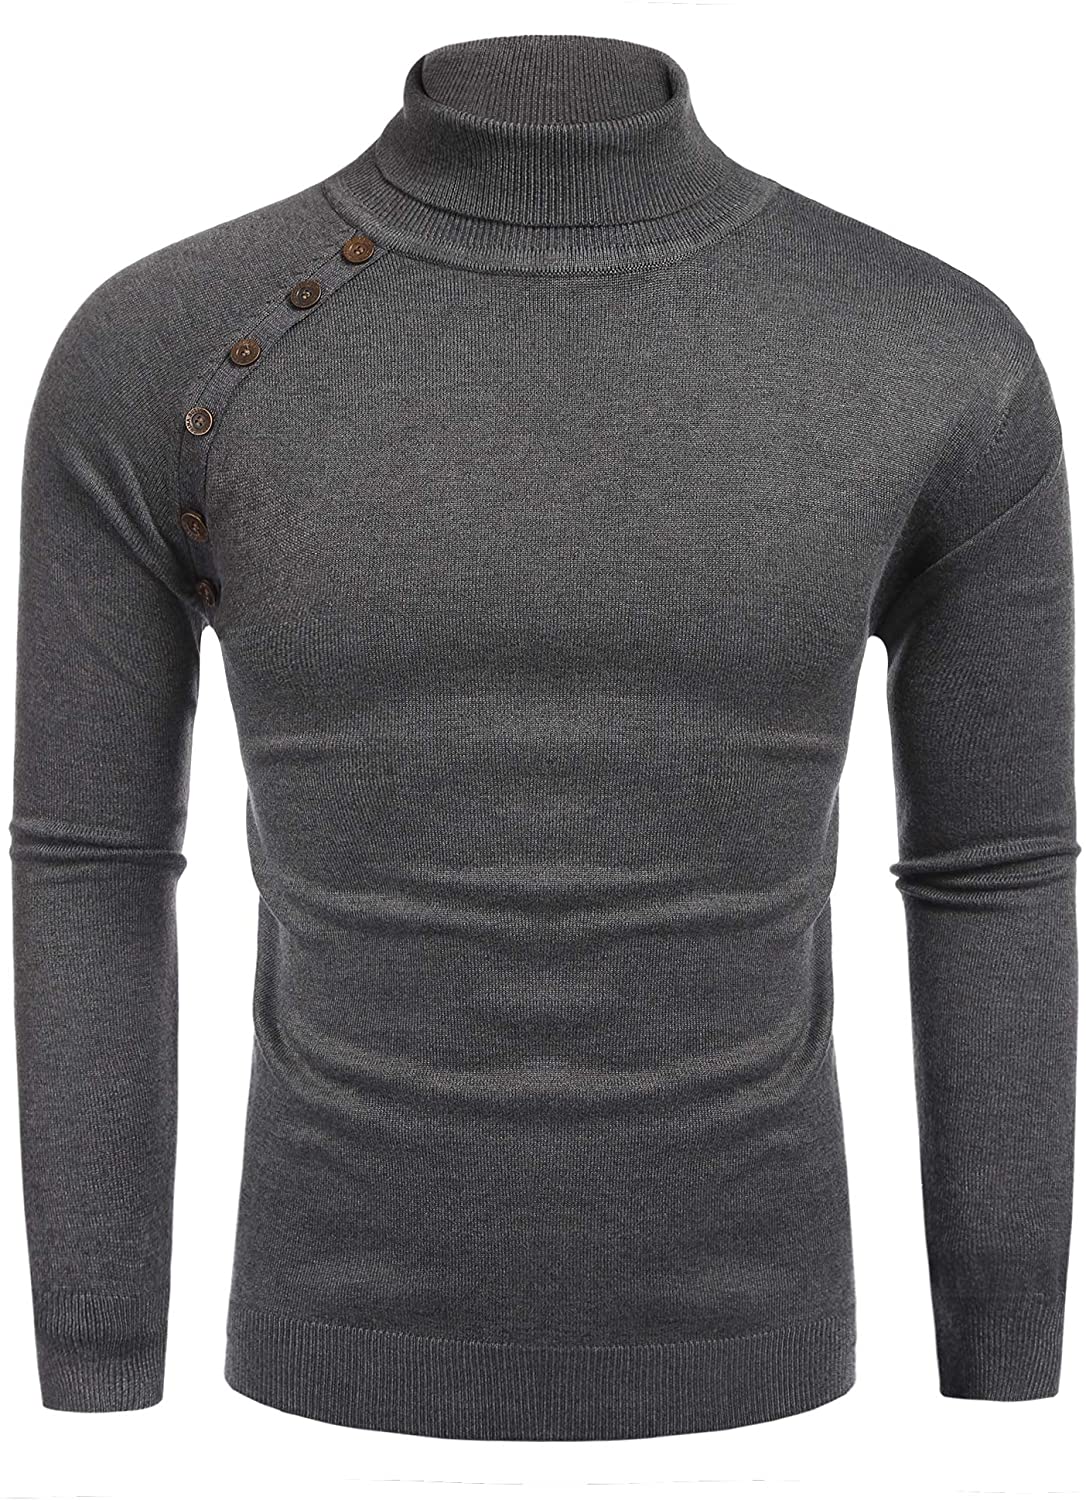 COOFANDY Men's Turtleneck Knit Casual Cable Ribbed Pullover High Neck ...